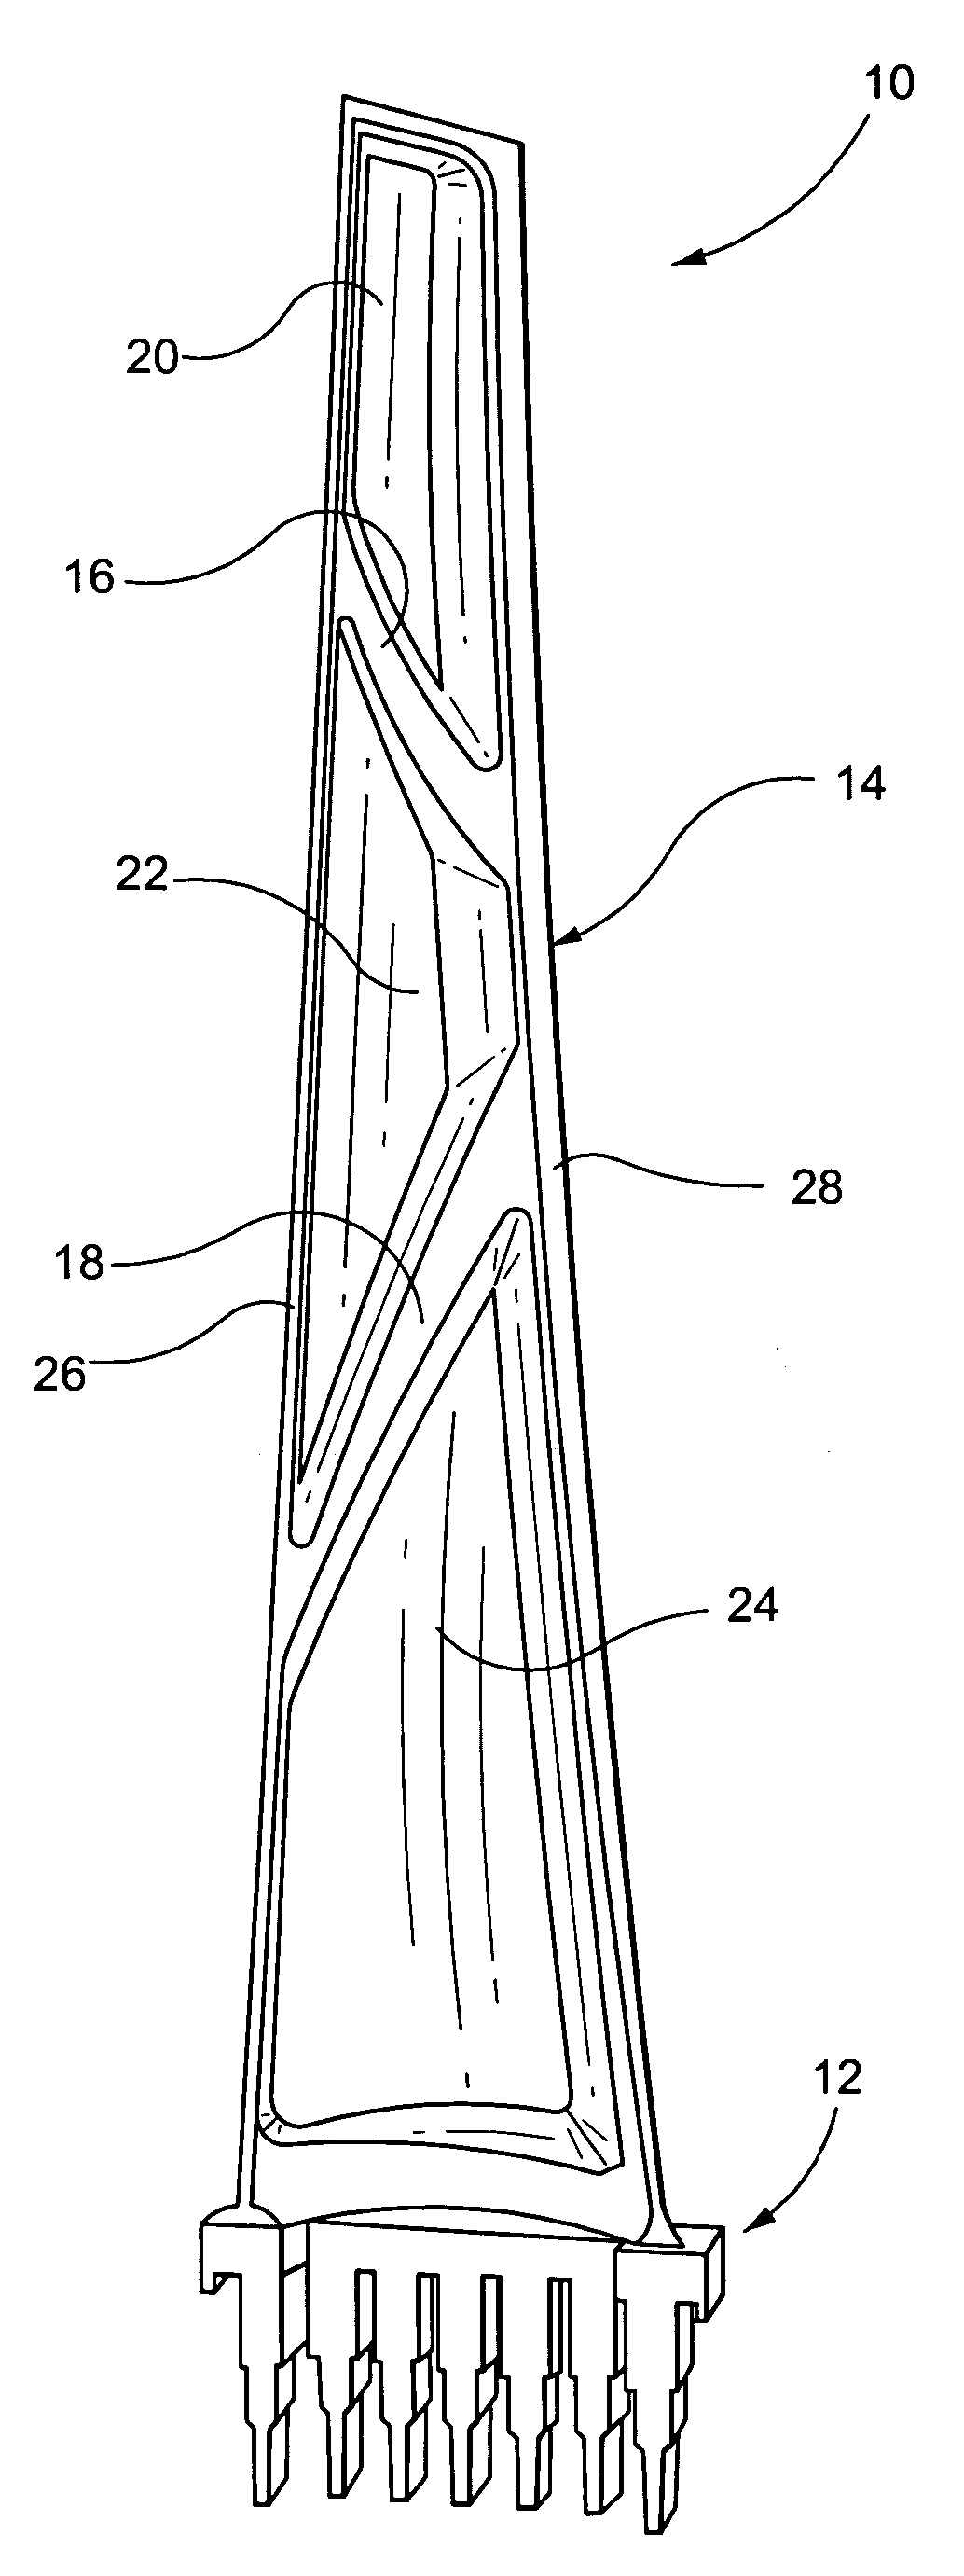 Mixed tuned hybrid blade related method